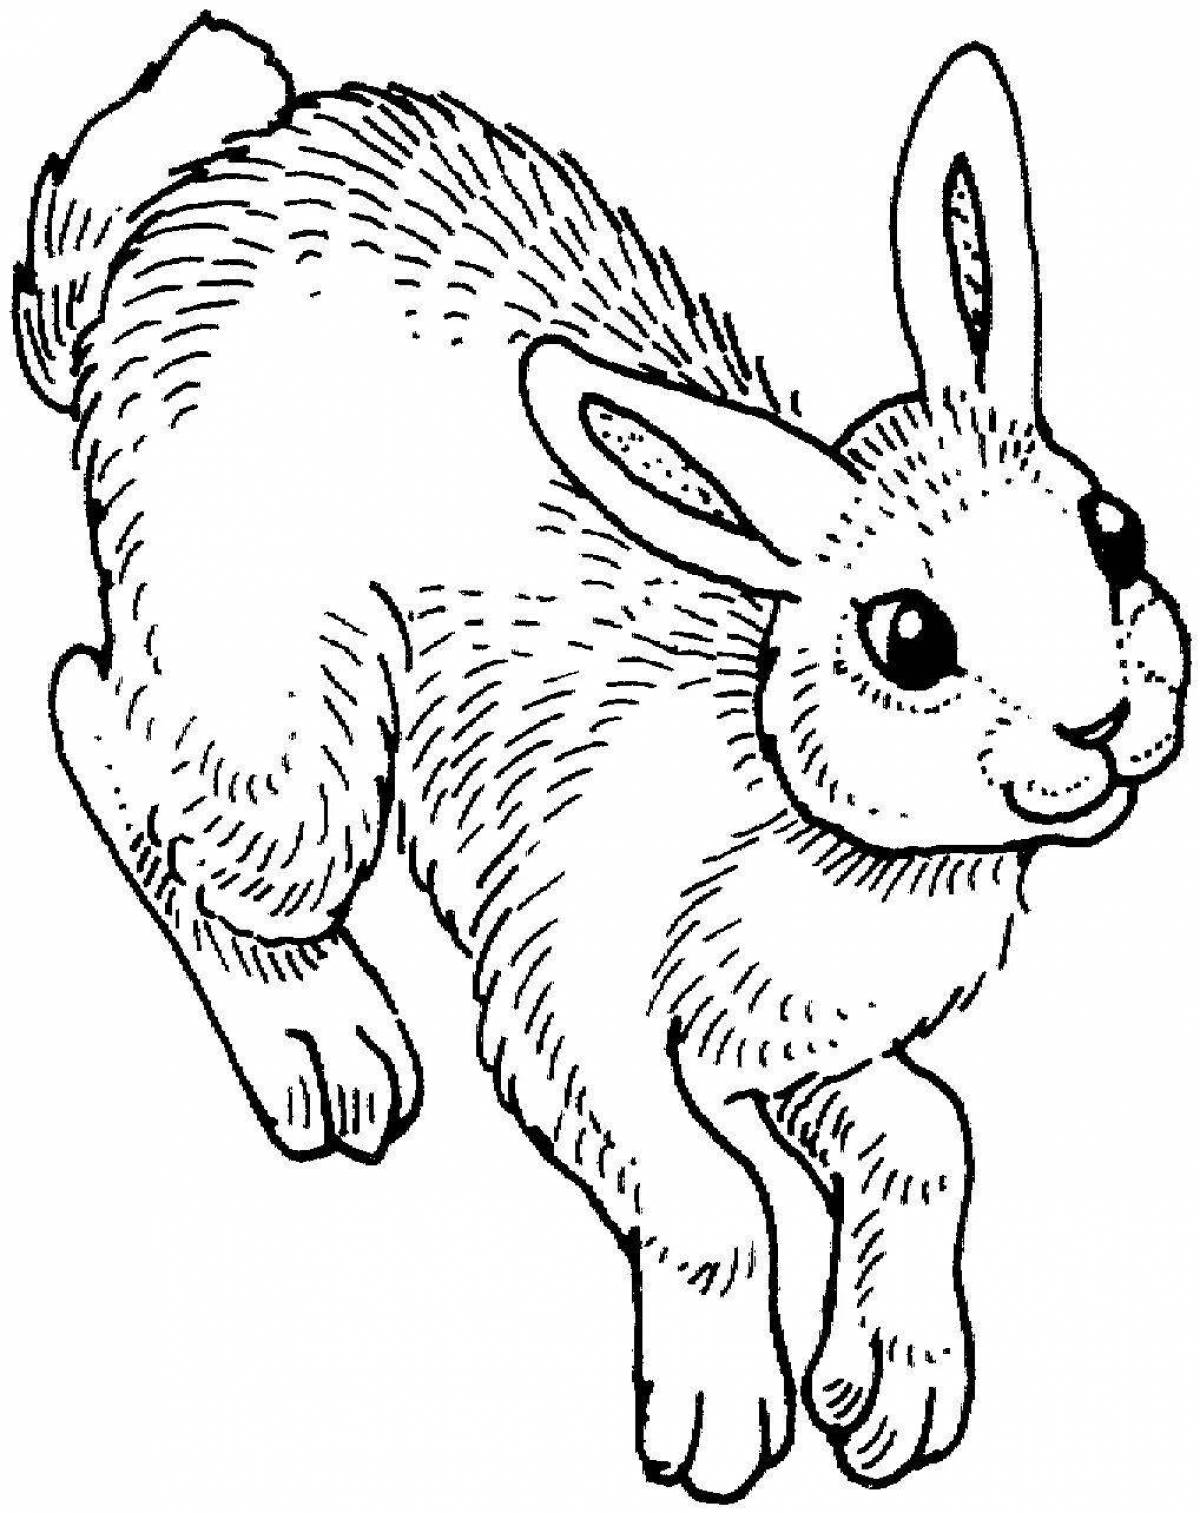 Spunky hare rabbit coloring page